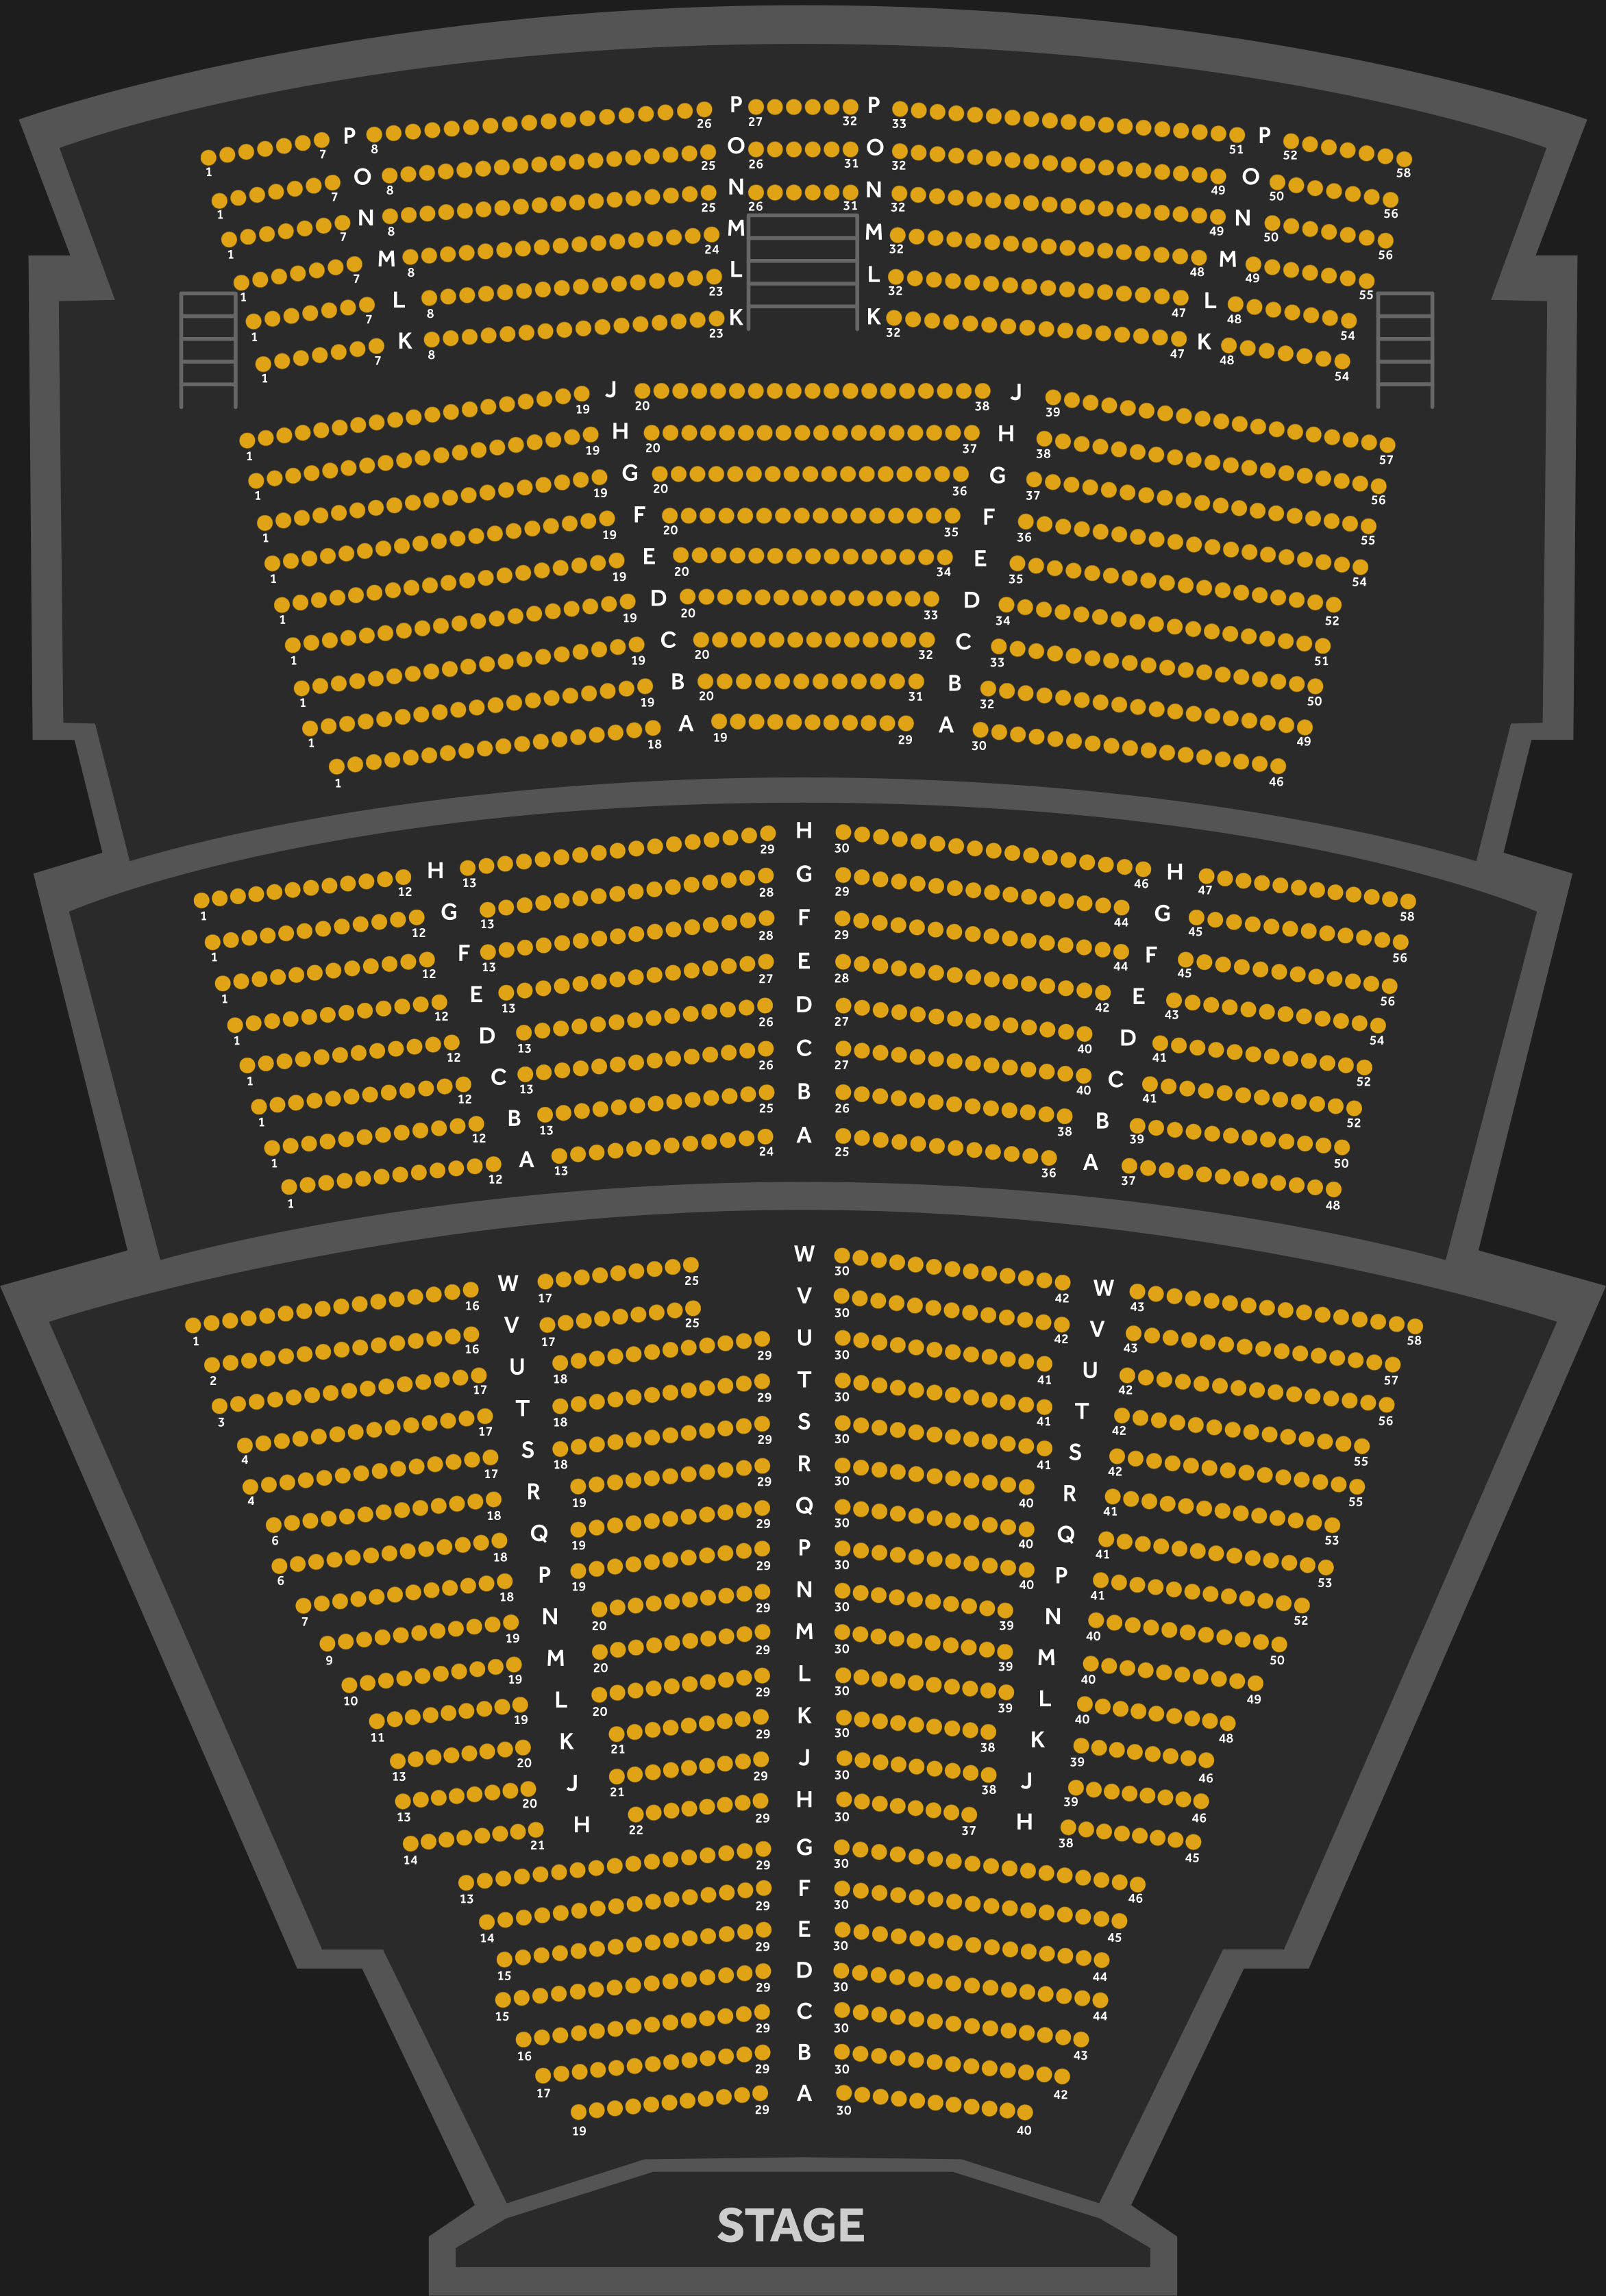 state theatre seating map Dress Circle Theatre Seating state theatre seating map